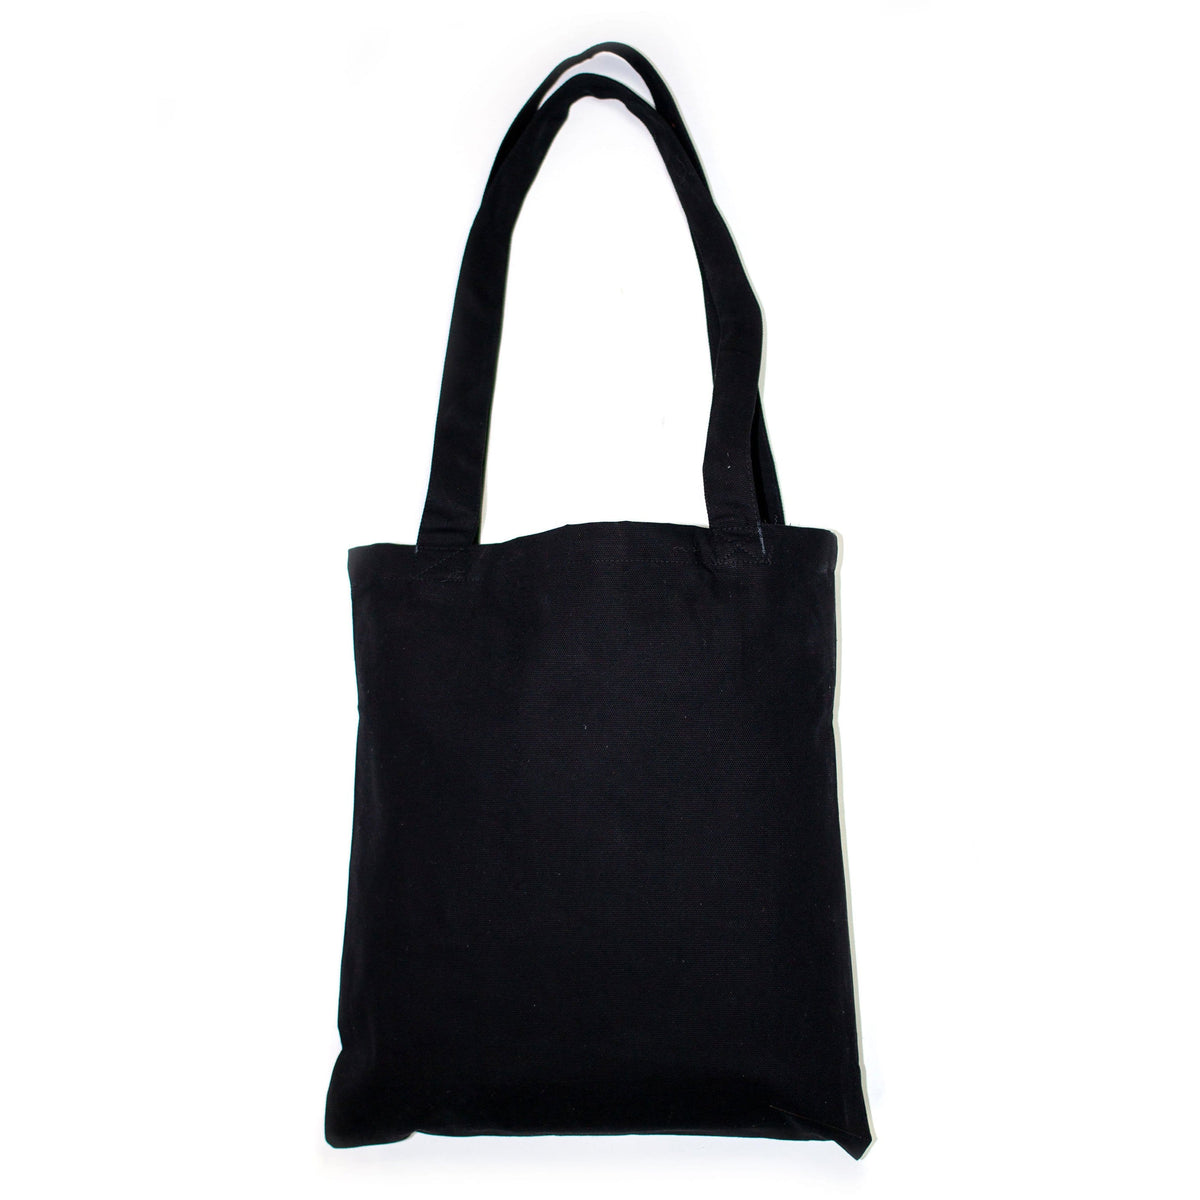 LOVE Languages Tote - Black and Gold Tote Bag - Love is Project